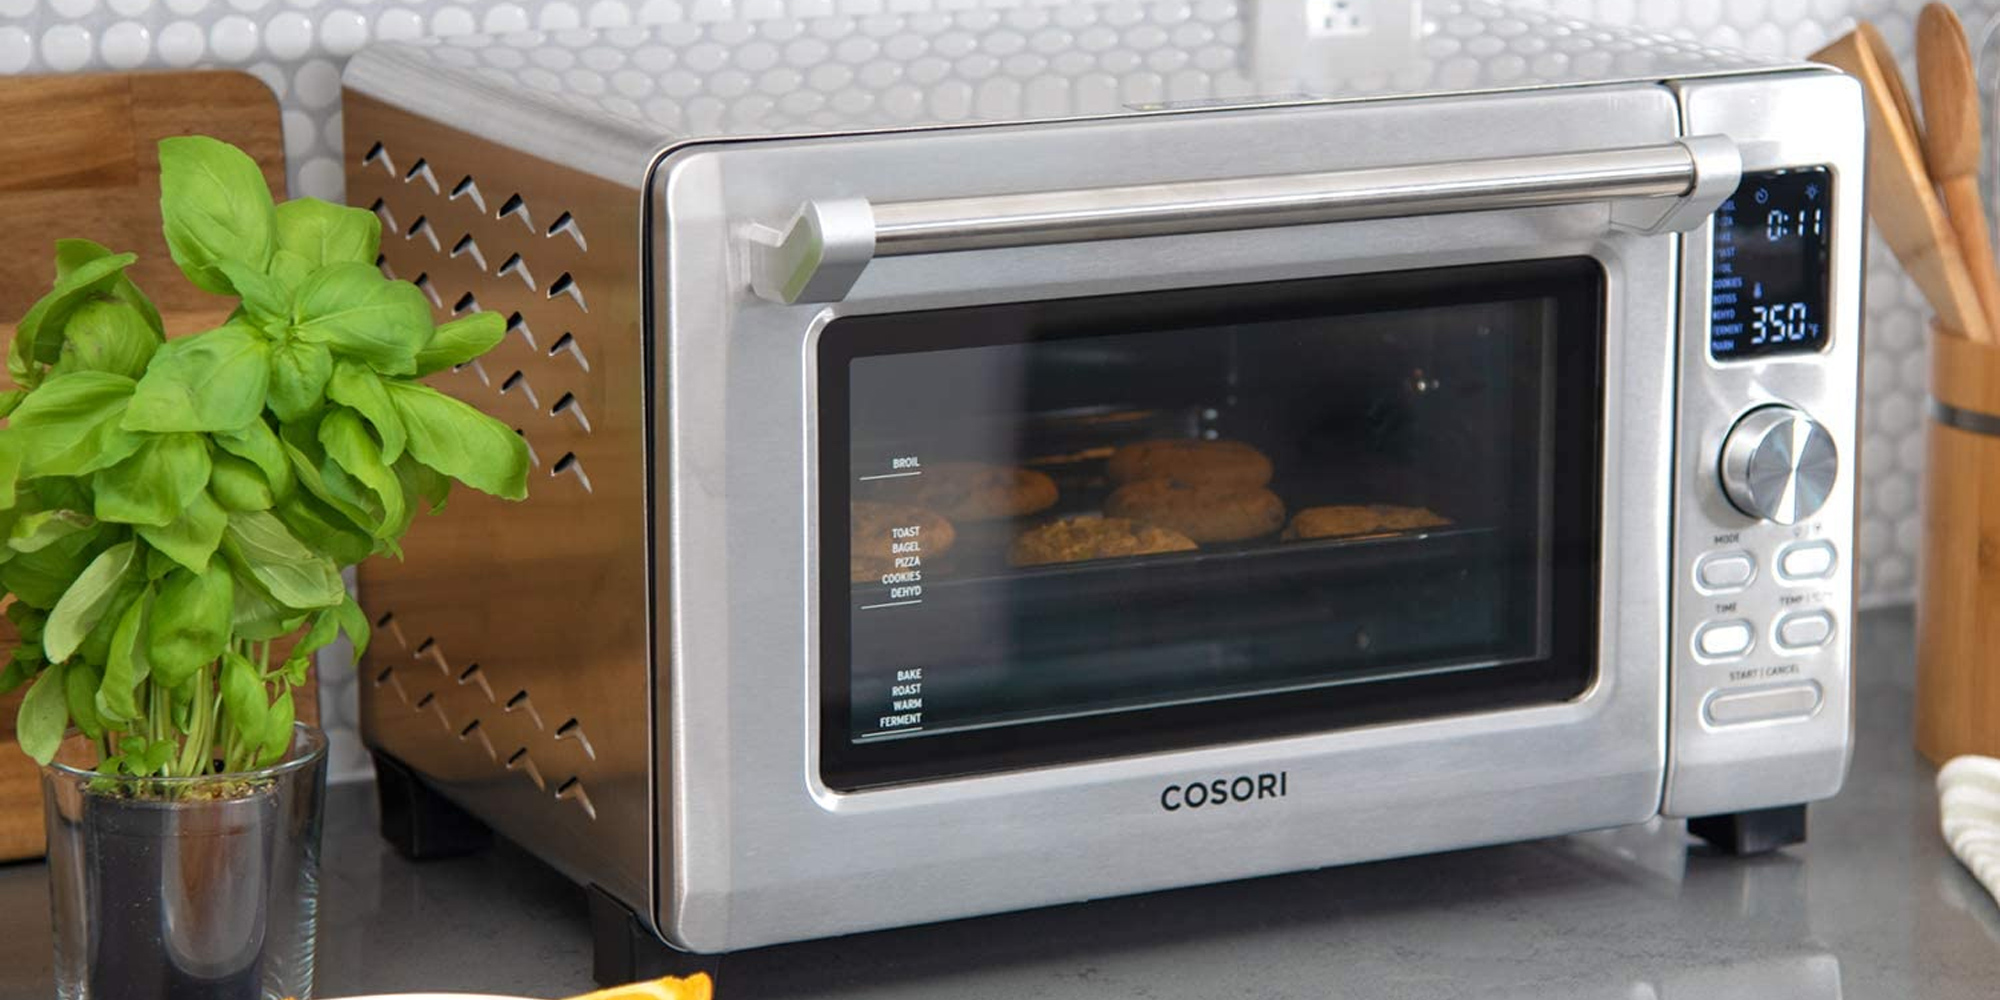 https://9to5toys.com/wp-content/uploads/sites/5/2022/01/cosori-11-in-1-toaster-oven-more.jpg